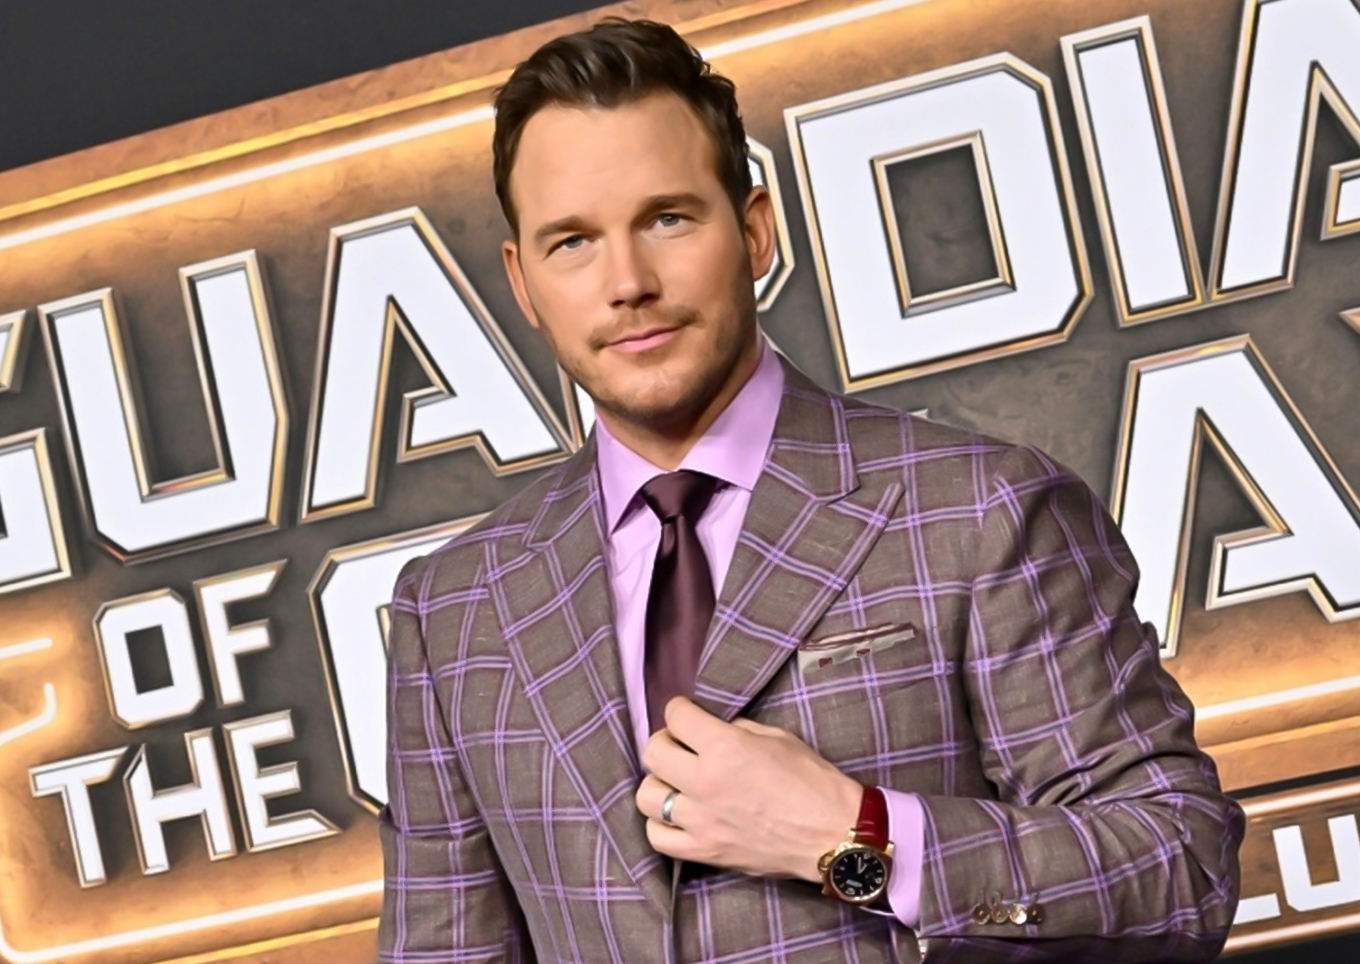 Chris Pratt at the Guardians of the Galaxy Vol. 3 premiere in a Panerai watch